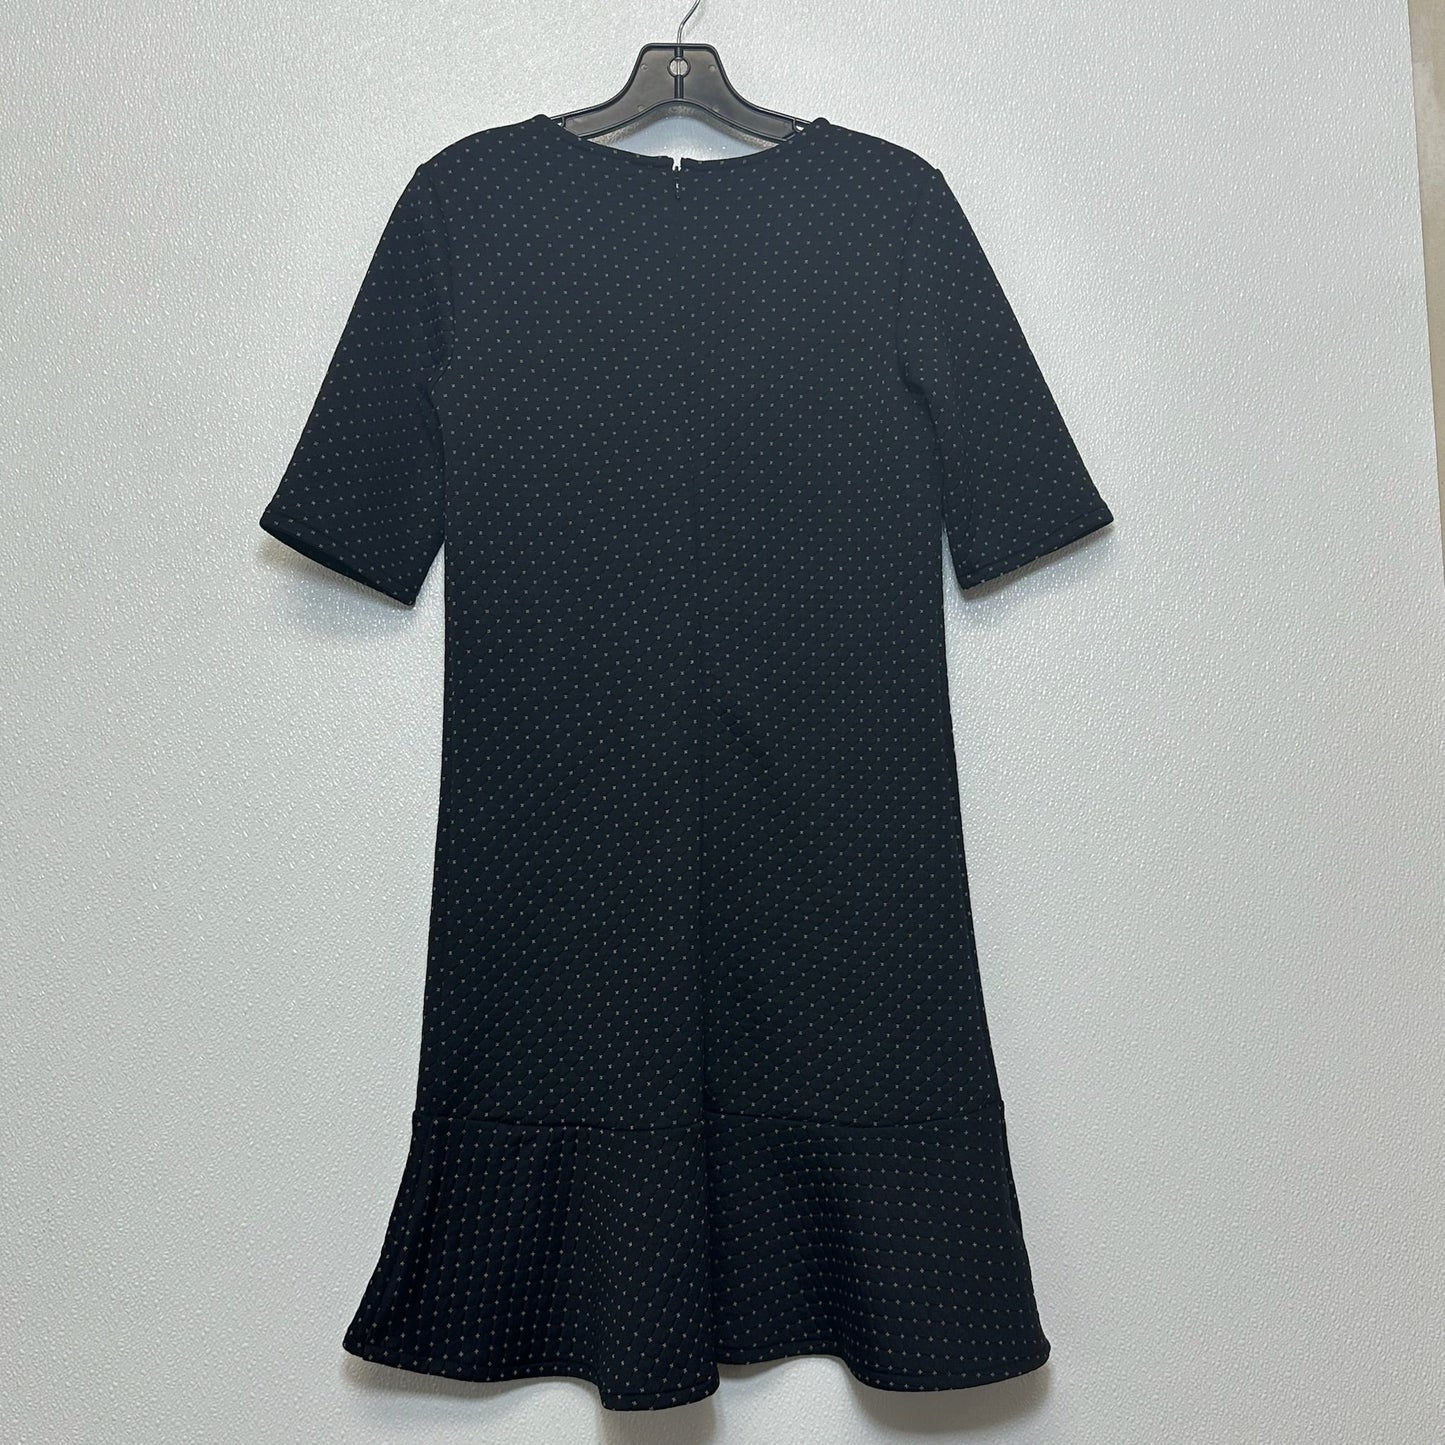 Dress Casual Short By Ann Taylor O  Size: 2